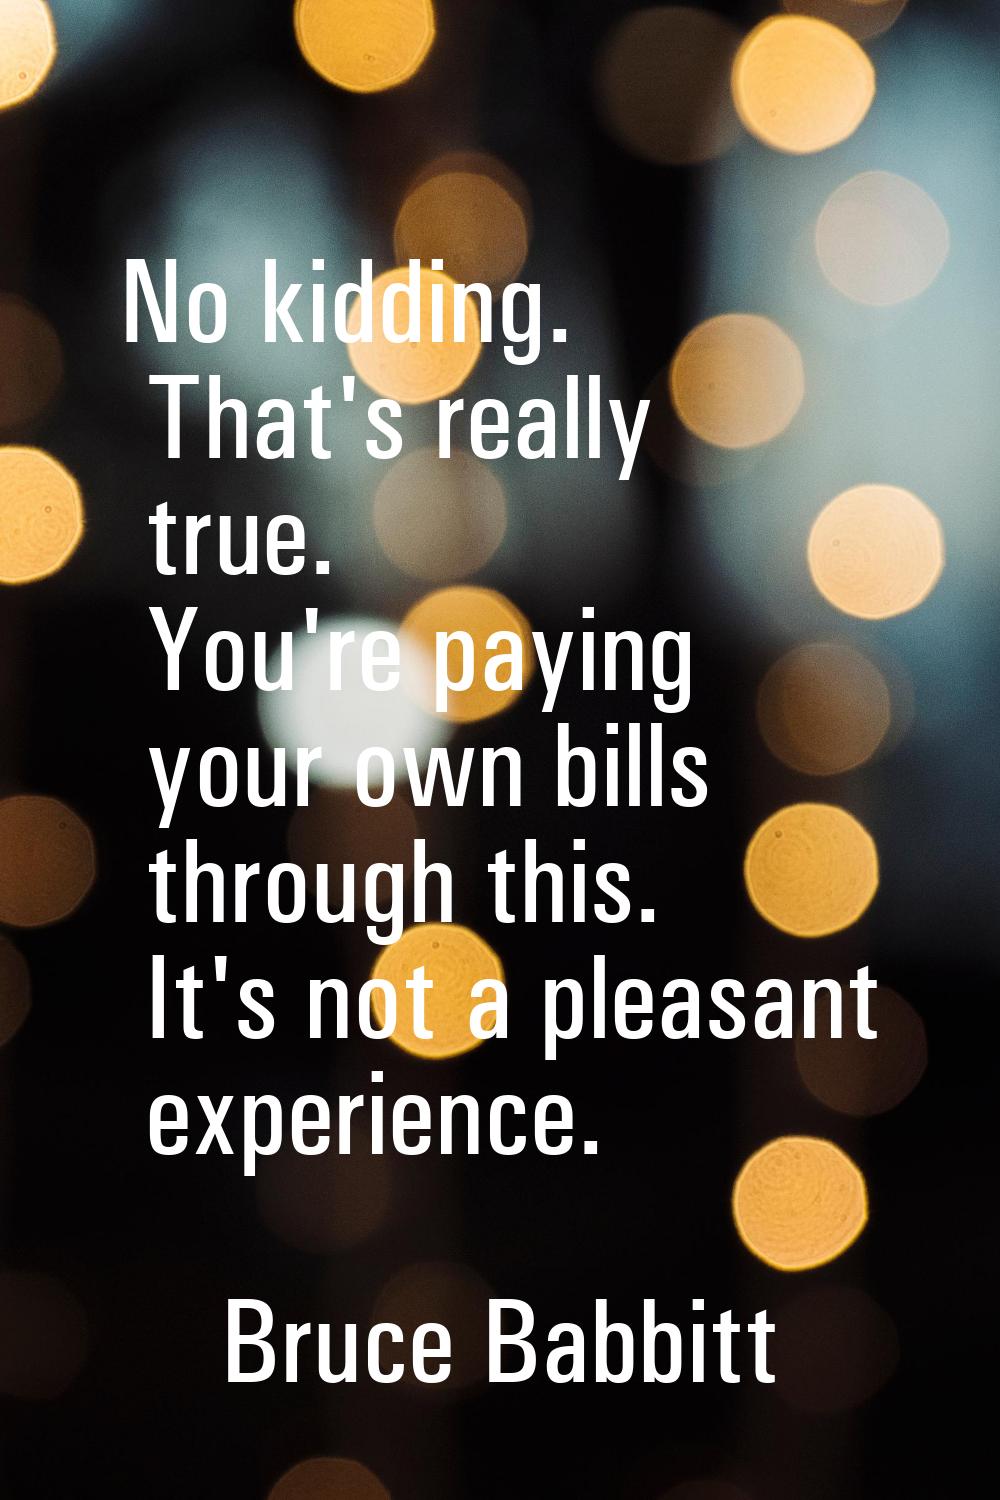 No kidding. That's really true. You're paying your own bills through this. It's not a pleasant expe